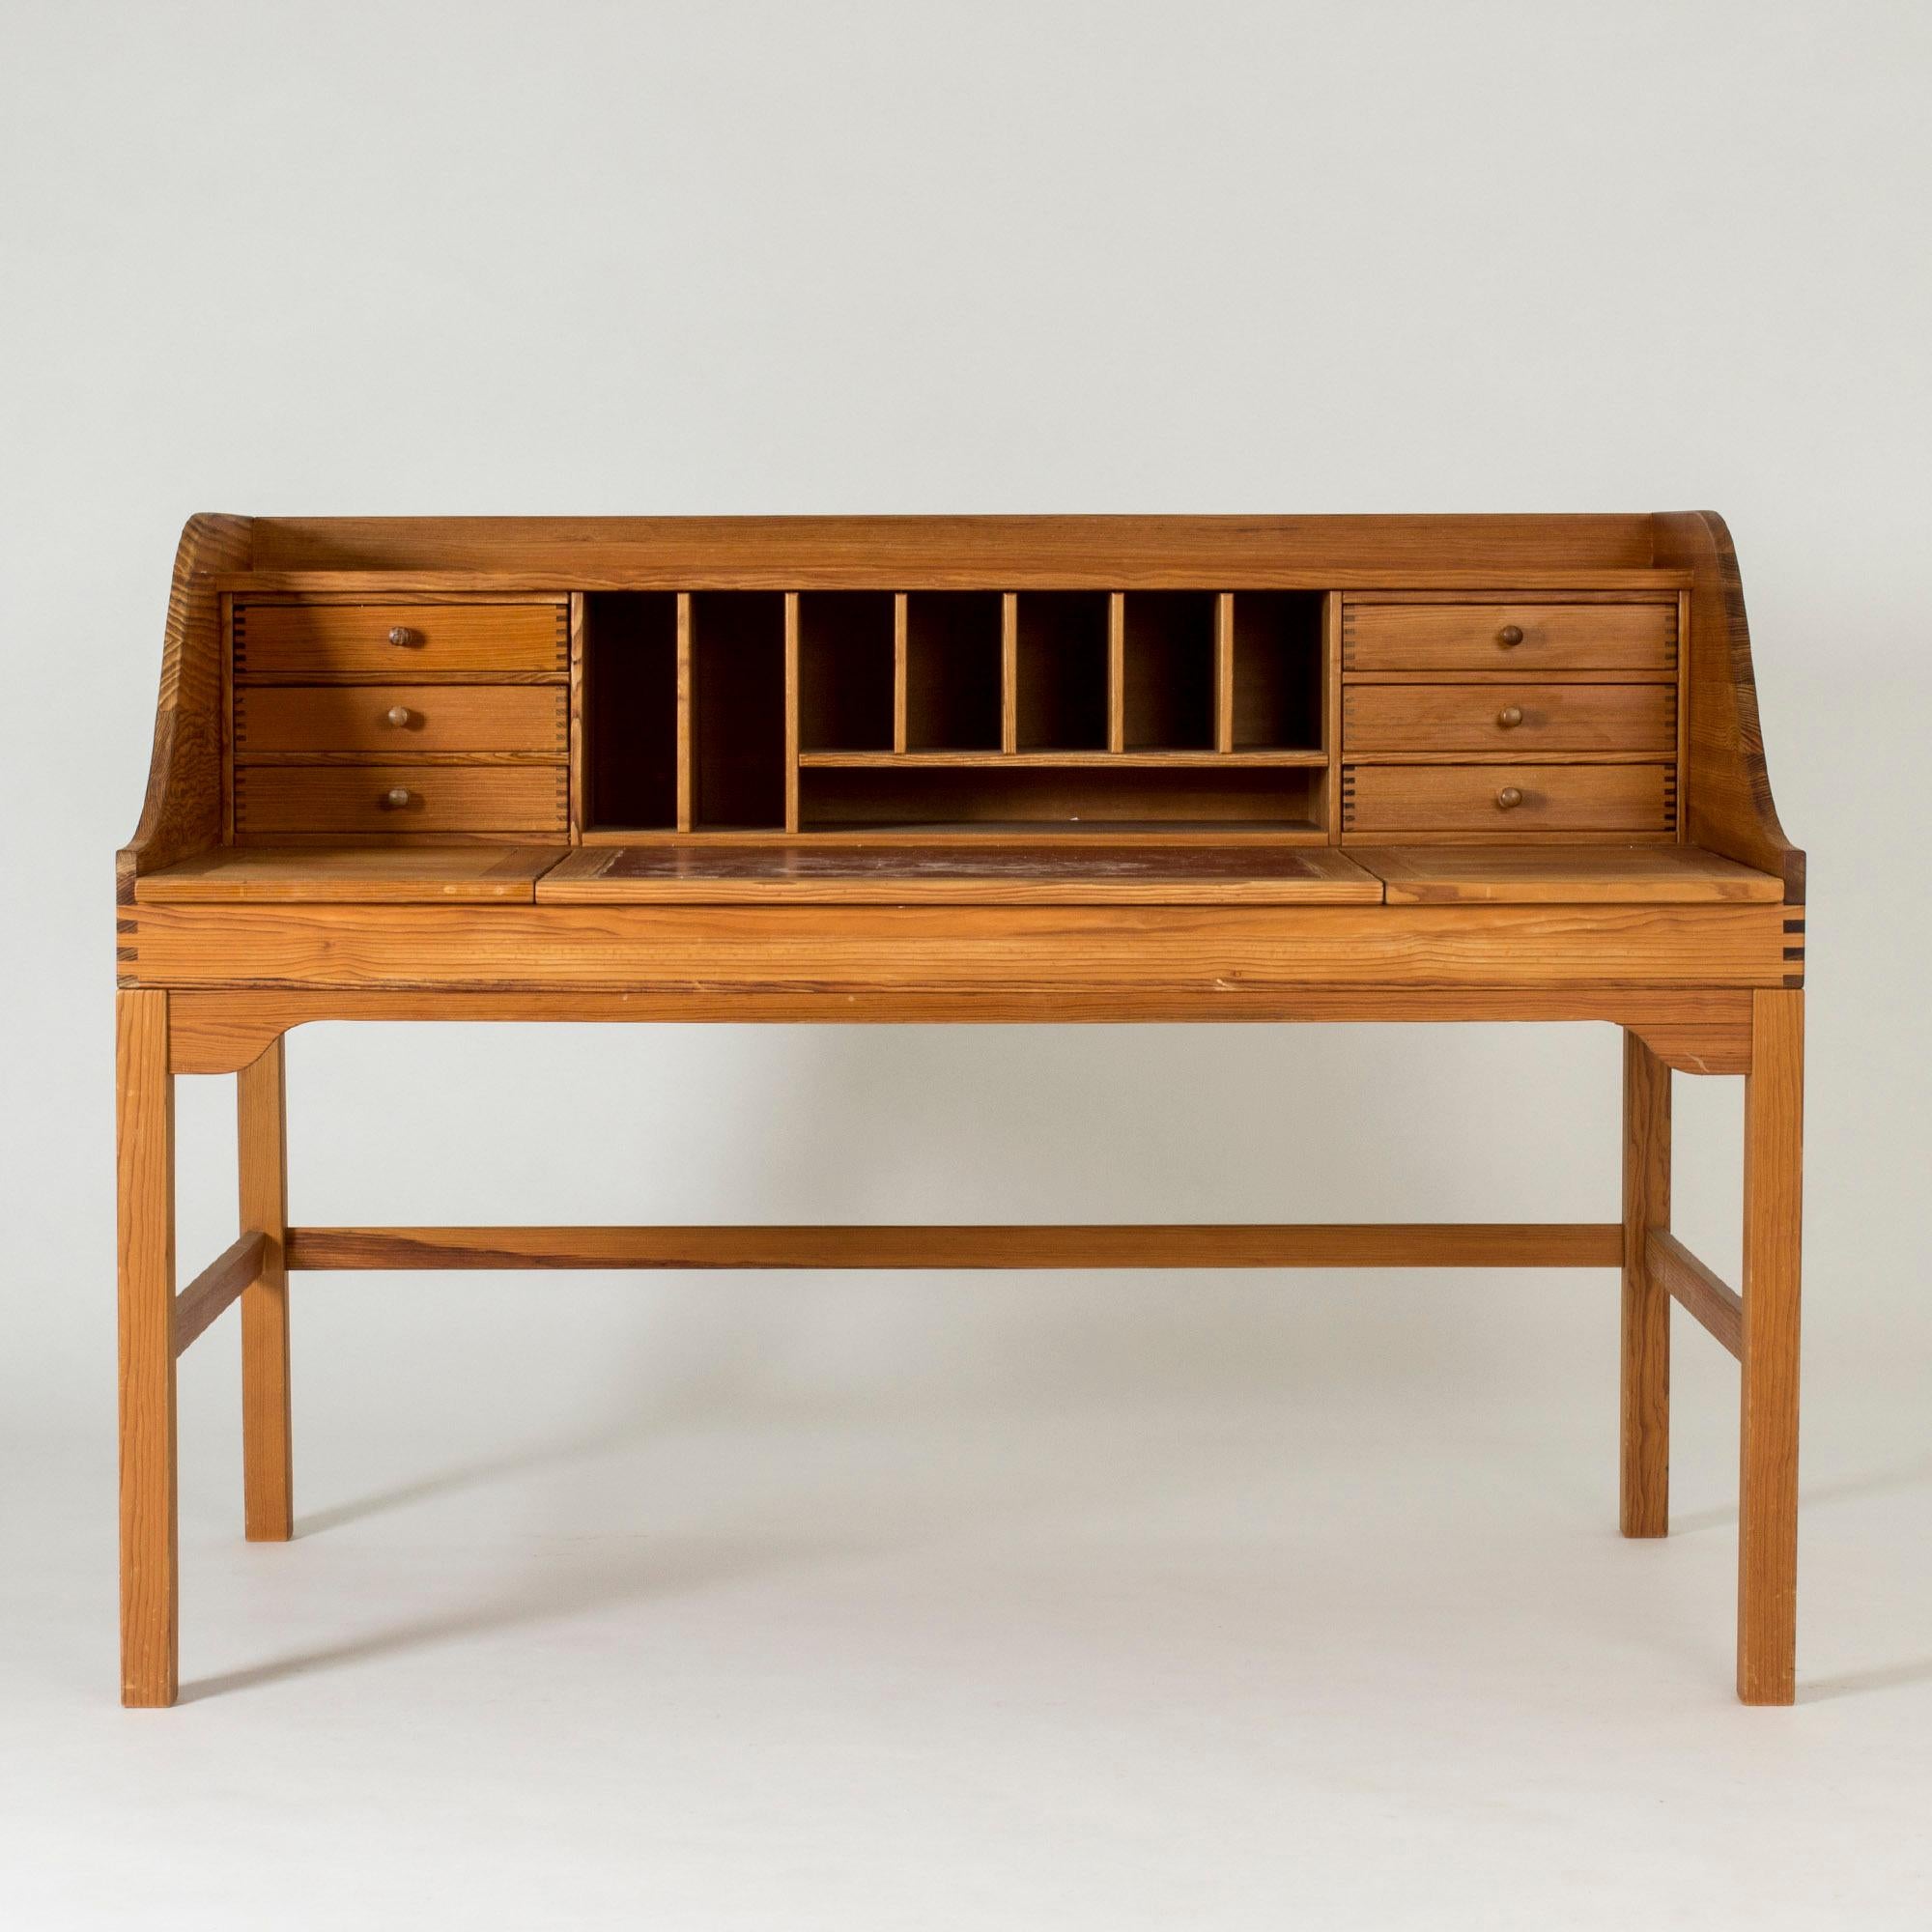 Elegant desk by Andreas Hansen, made in rustic Oregon pine with distinct woodgrain and joinery. The tabletop is dressed with leather in the middle, and opens up to reveal storage underneath. Several drawers and shelves provide optimal